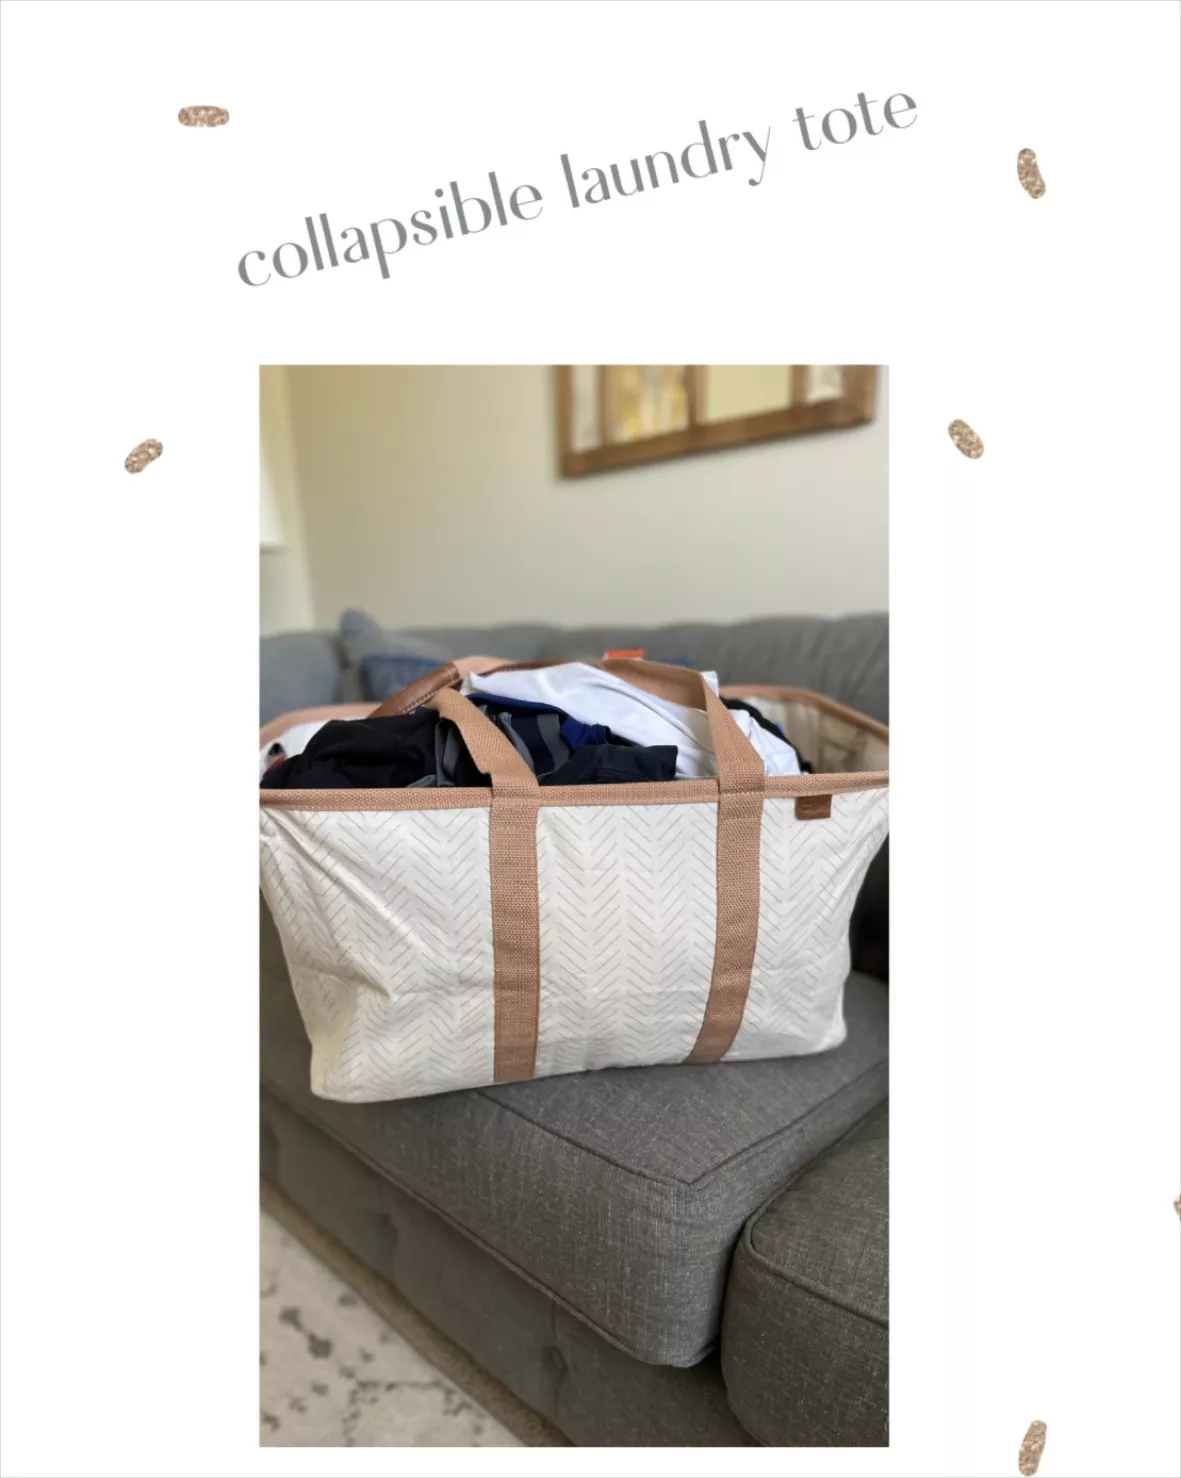 CleverMade Laundry Basket Totes 2-Pack